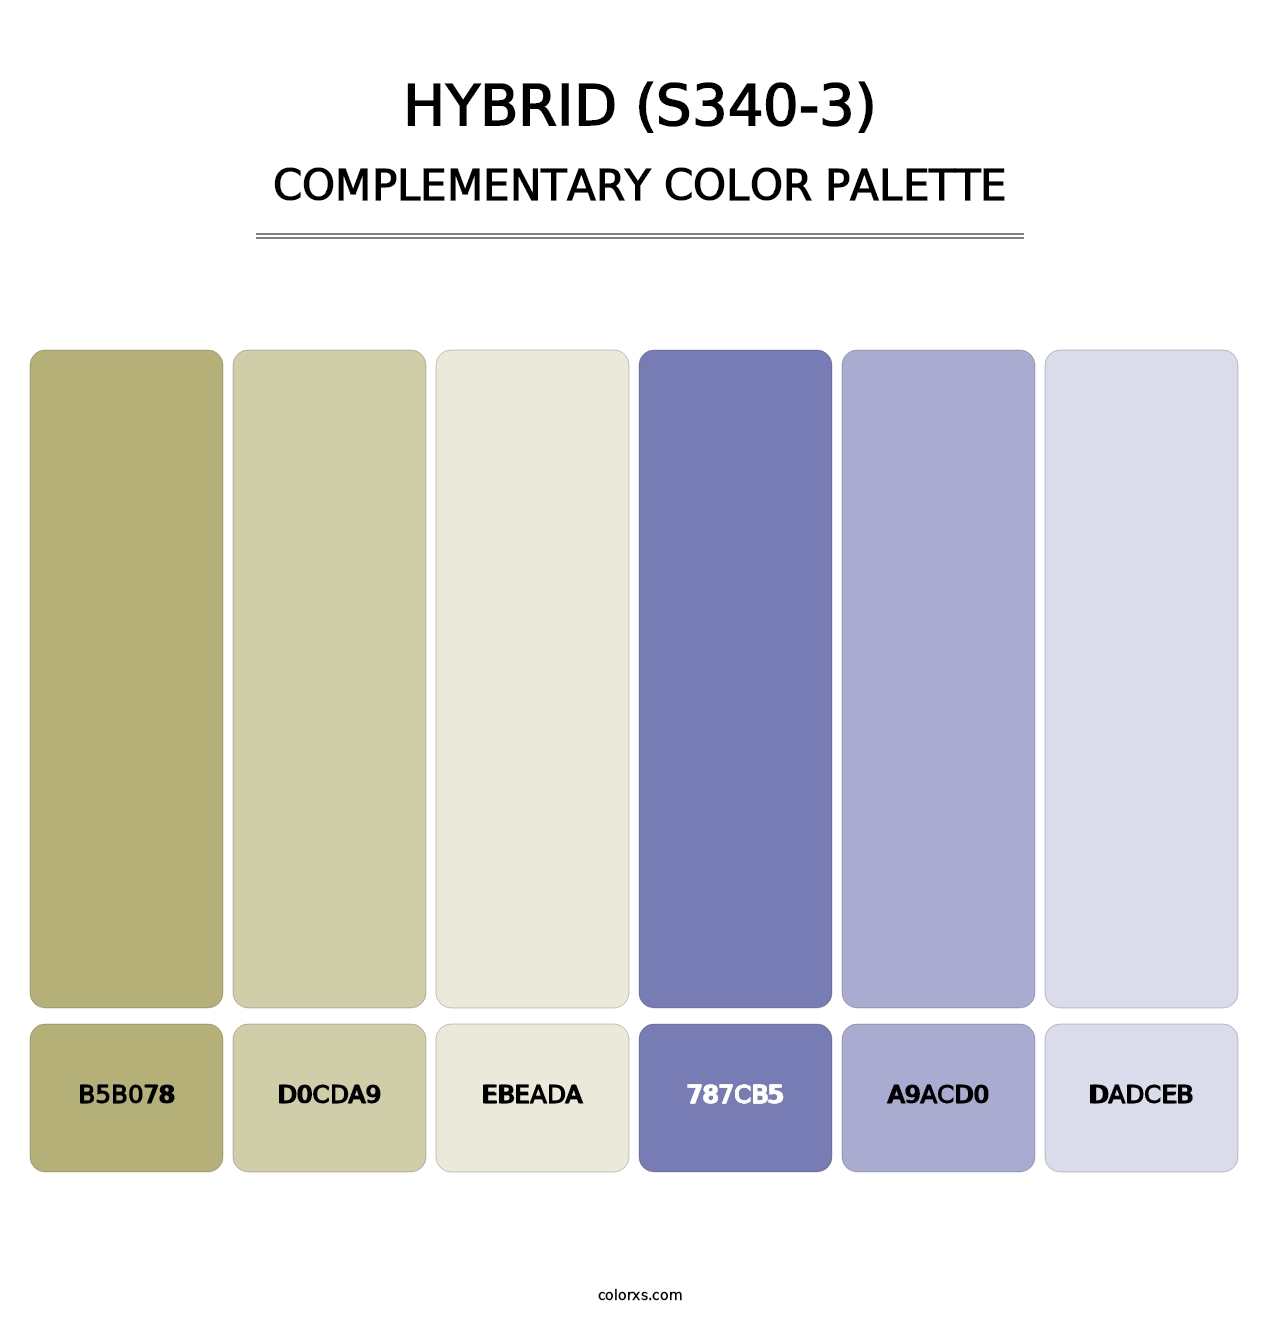 Hybrid (S340-3) - Complementary Color Palette